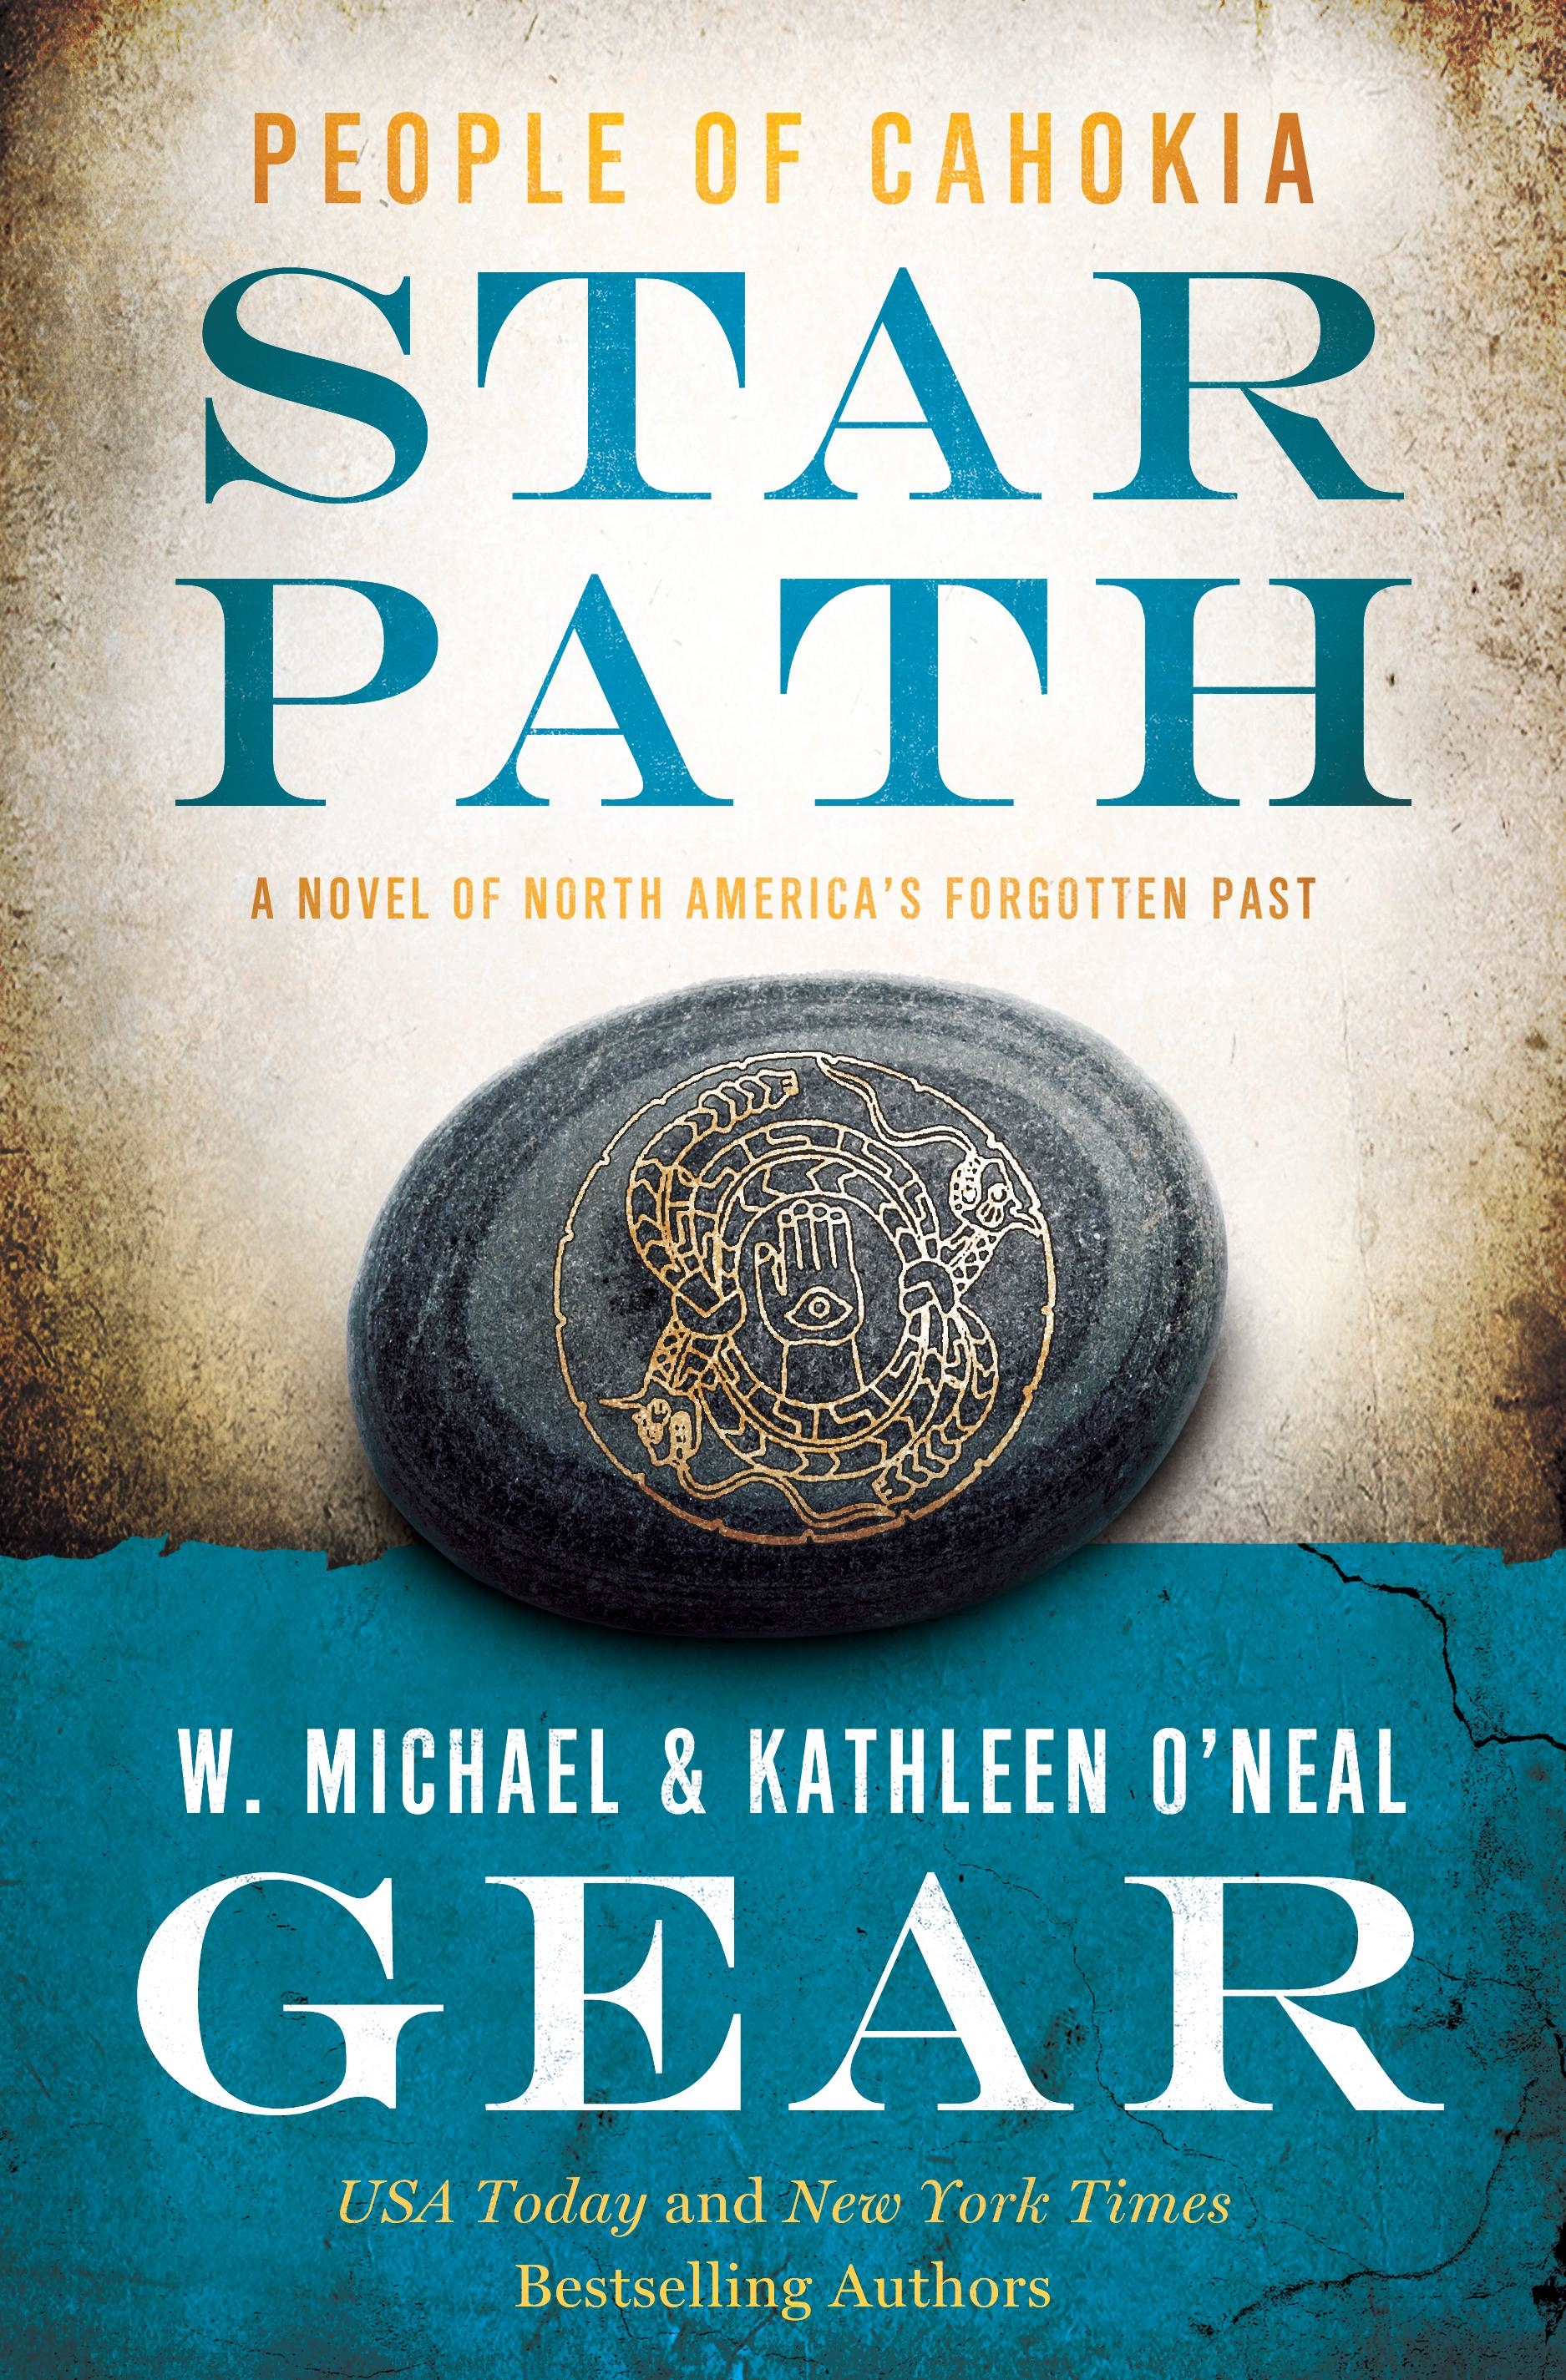 Star Path : People of Cahokia by W. Michael Gear, Kathleen O'Neal Gear